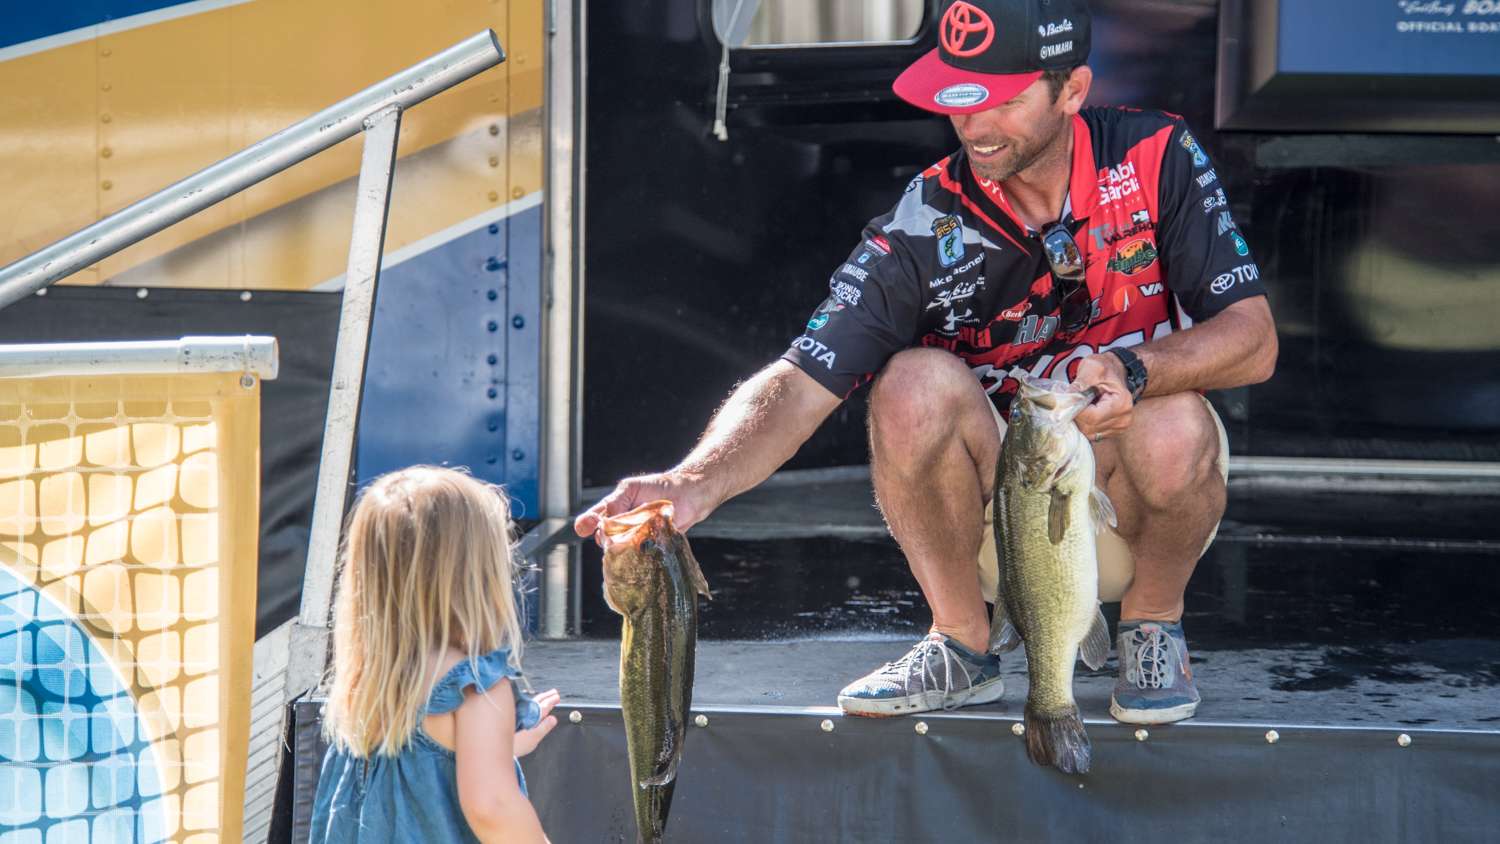 Mike Iaconelli (8th, 16-1)